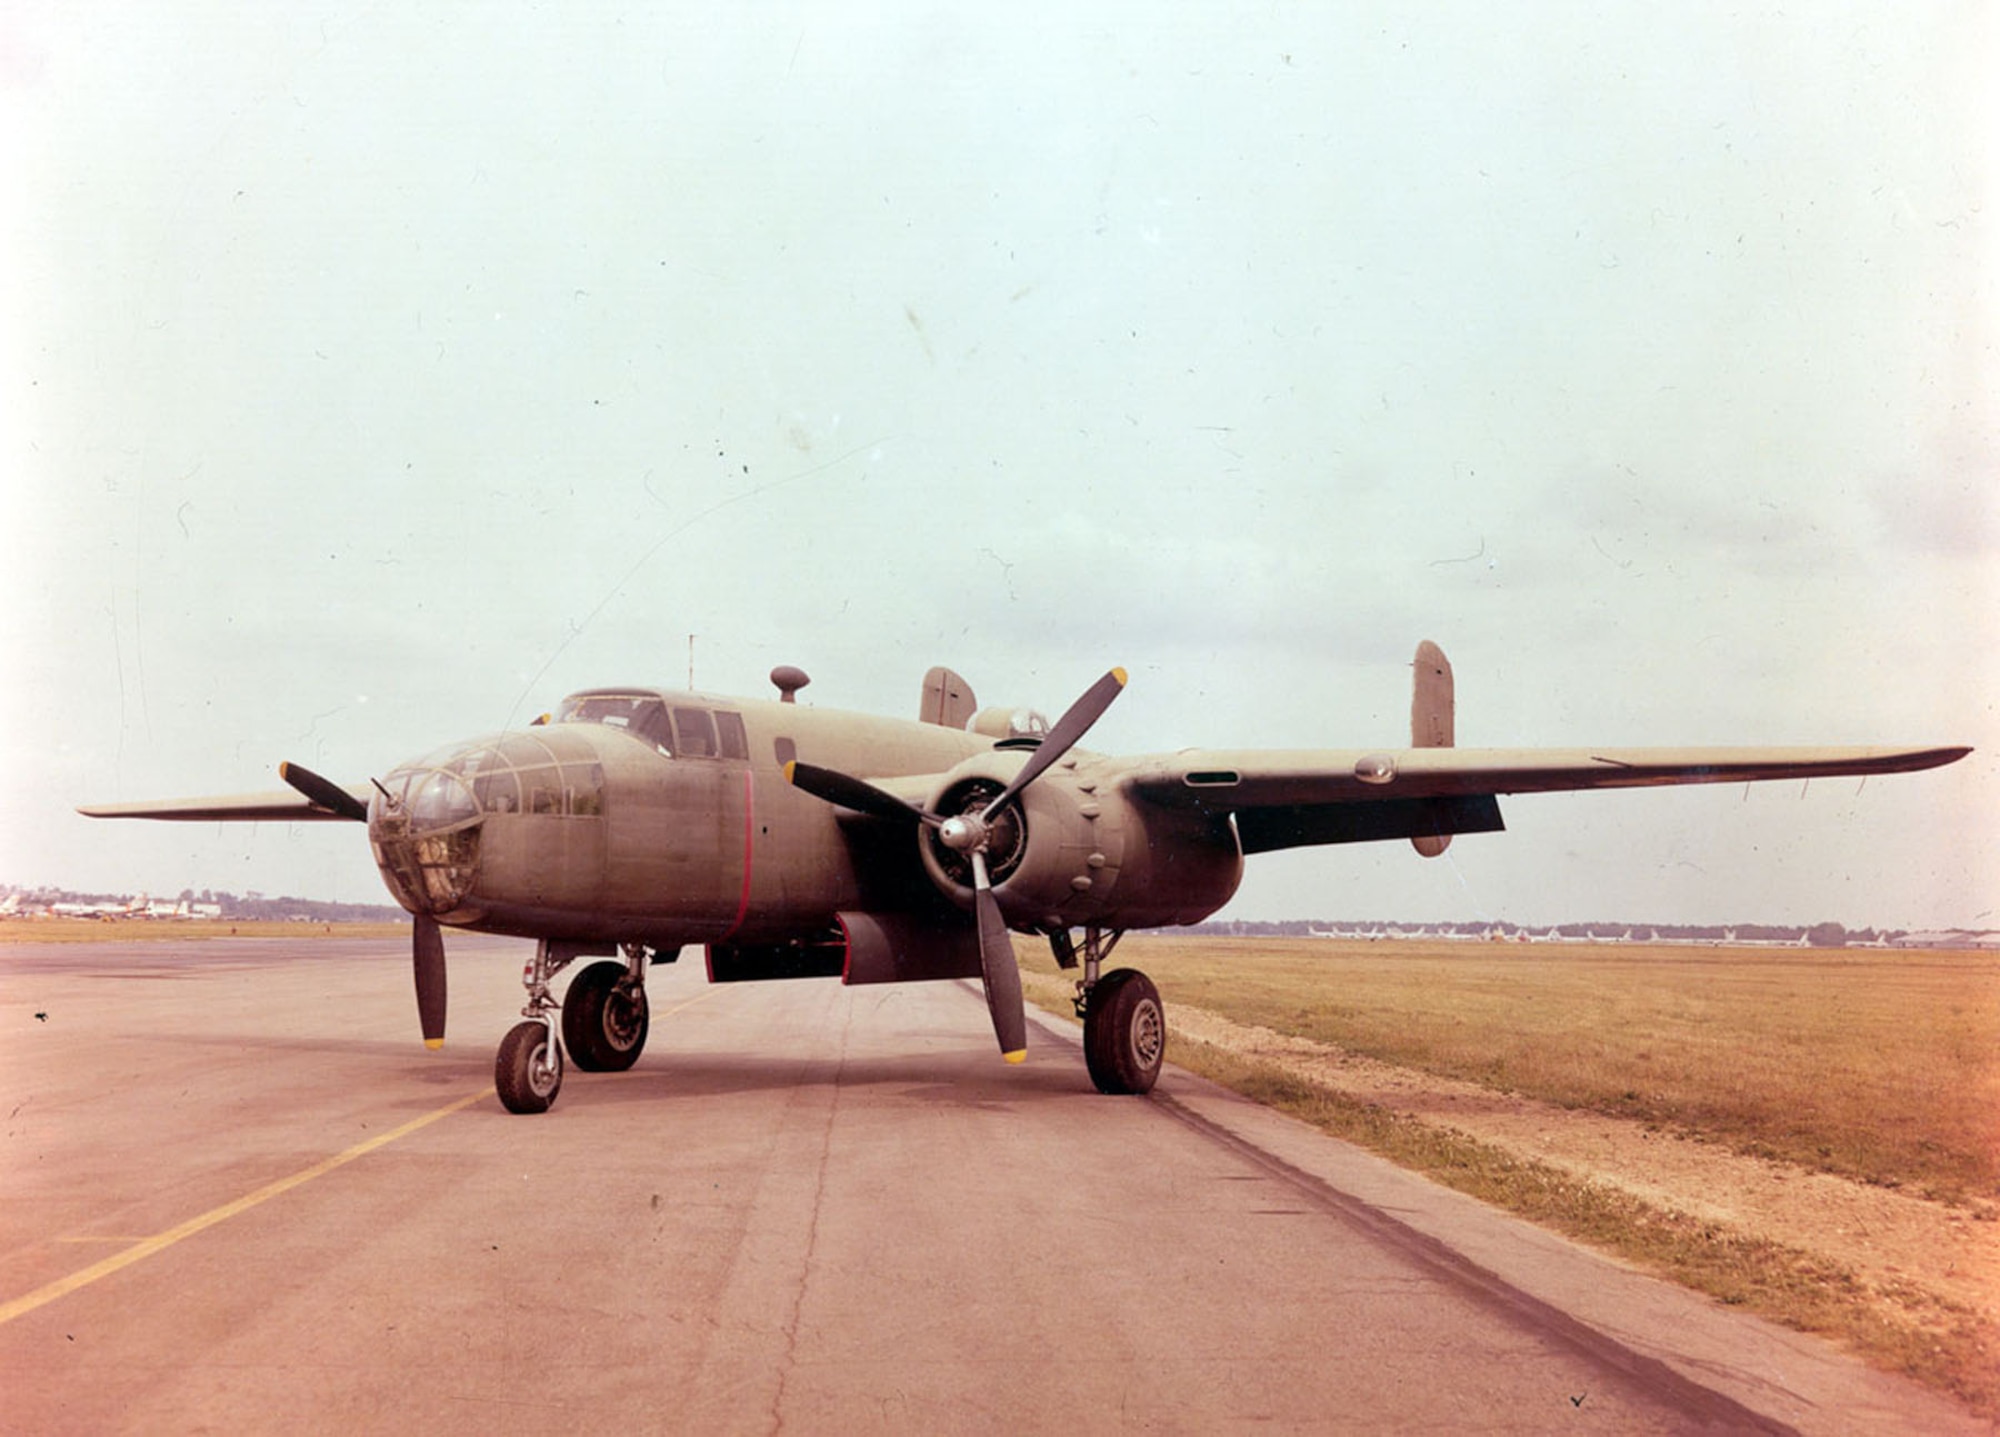 DAYTON, Ohio -- North American B-25B Mitchell at the National Museum of the United States Air Force. (U.S. Air Force photo)